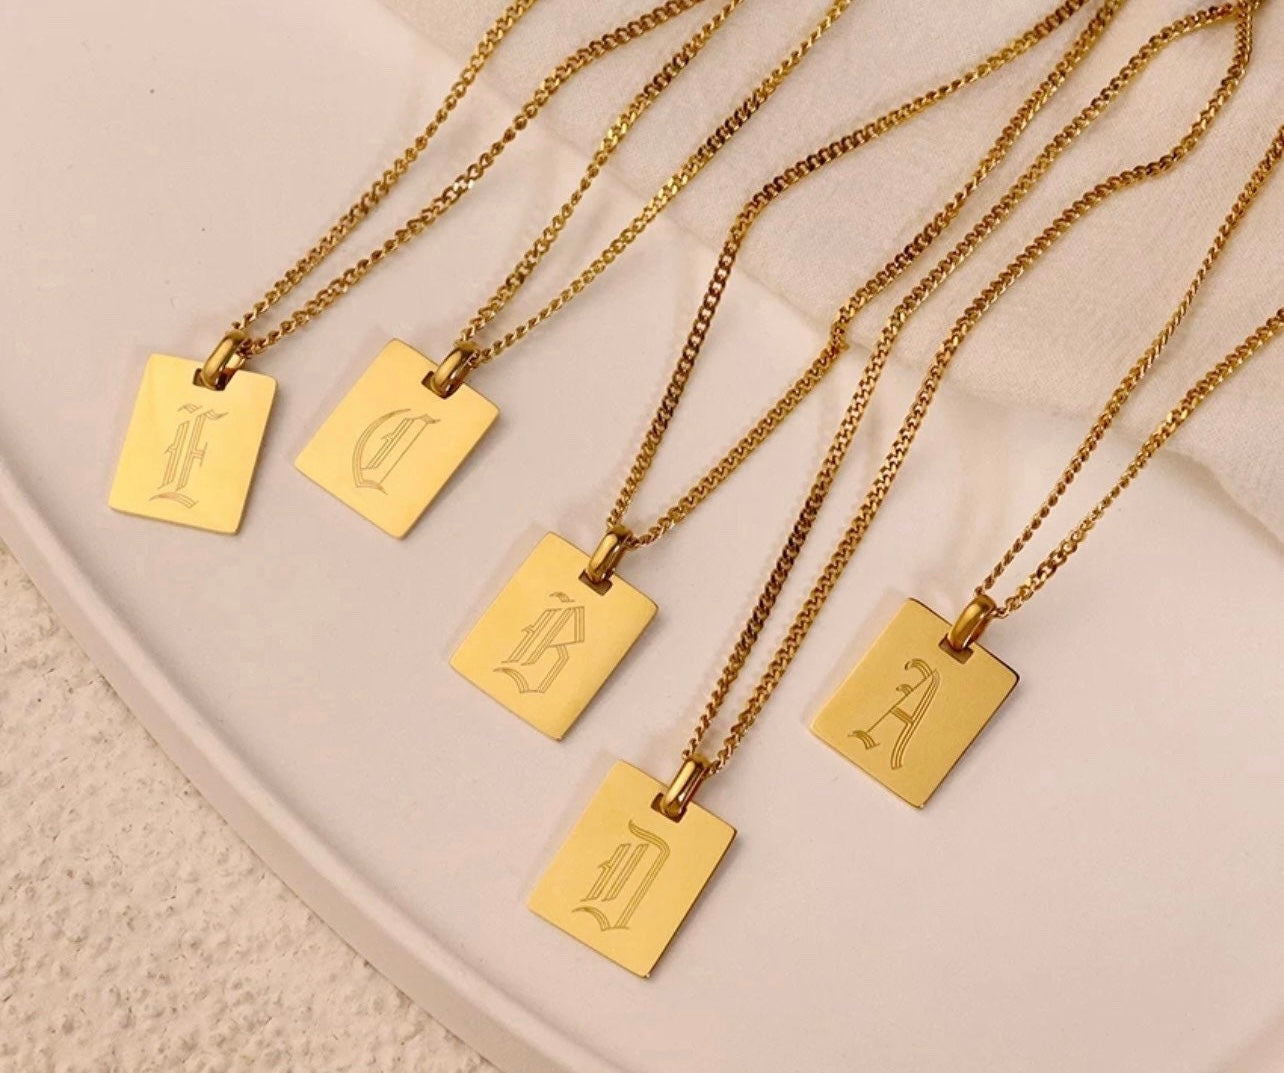 The Monogram Initial Necklace | Altar'd State